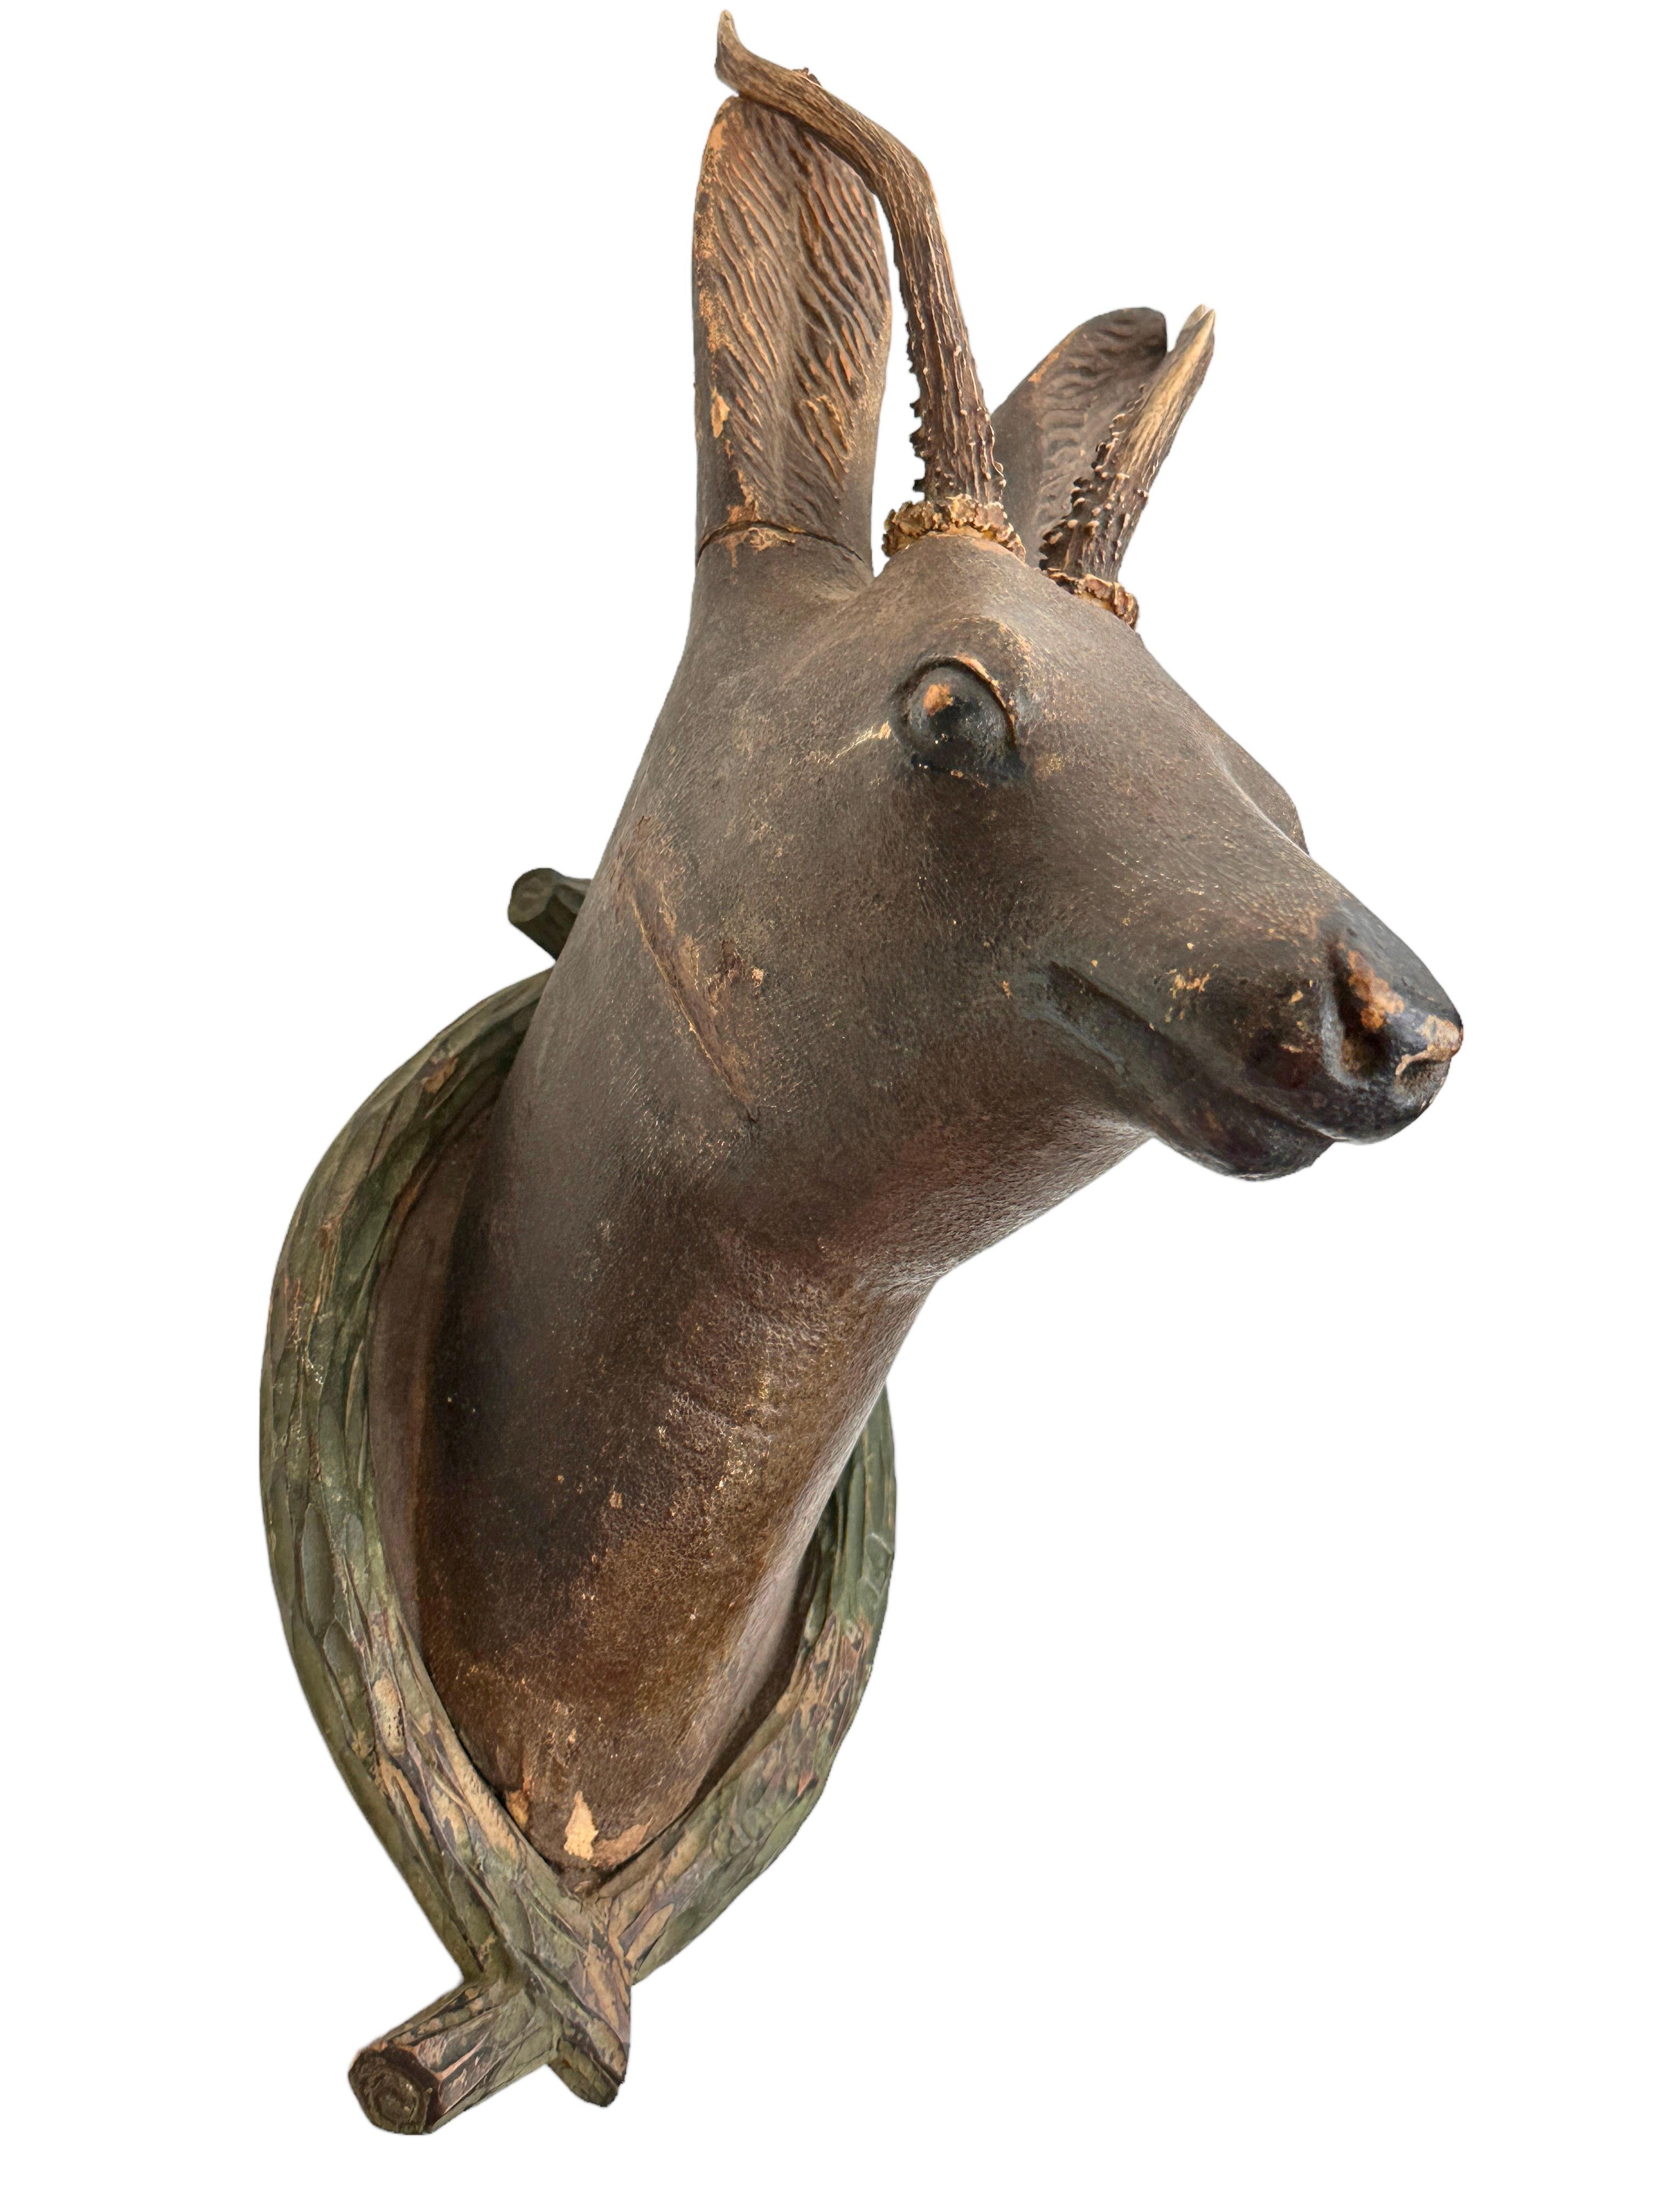 Black Forest Large Folk Art Wood Carved Deer Head with Real Antlers, Austria 19th Century